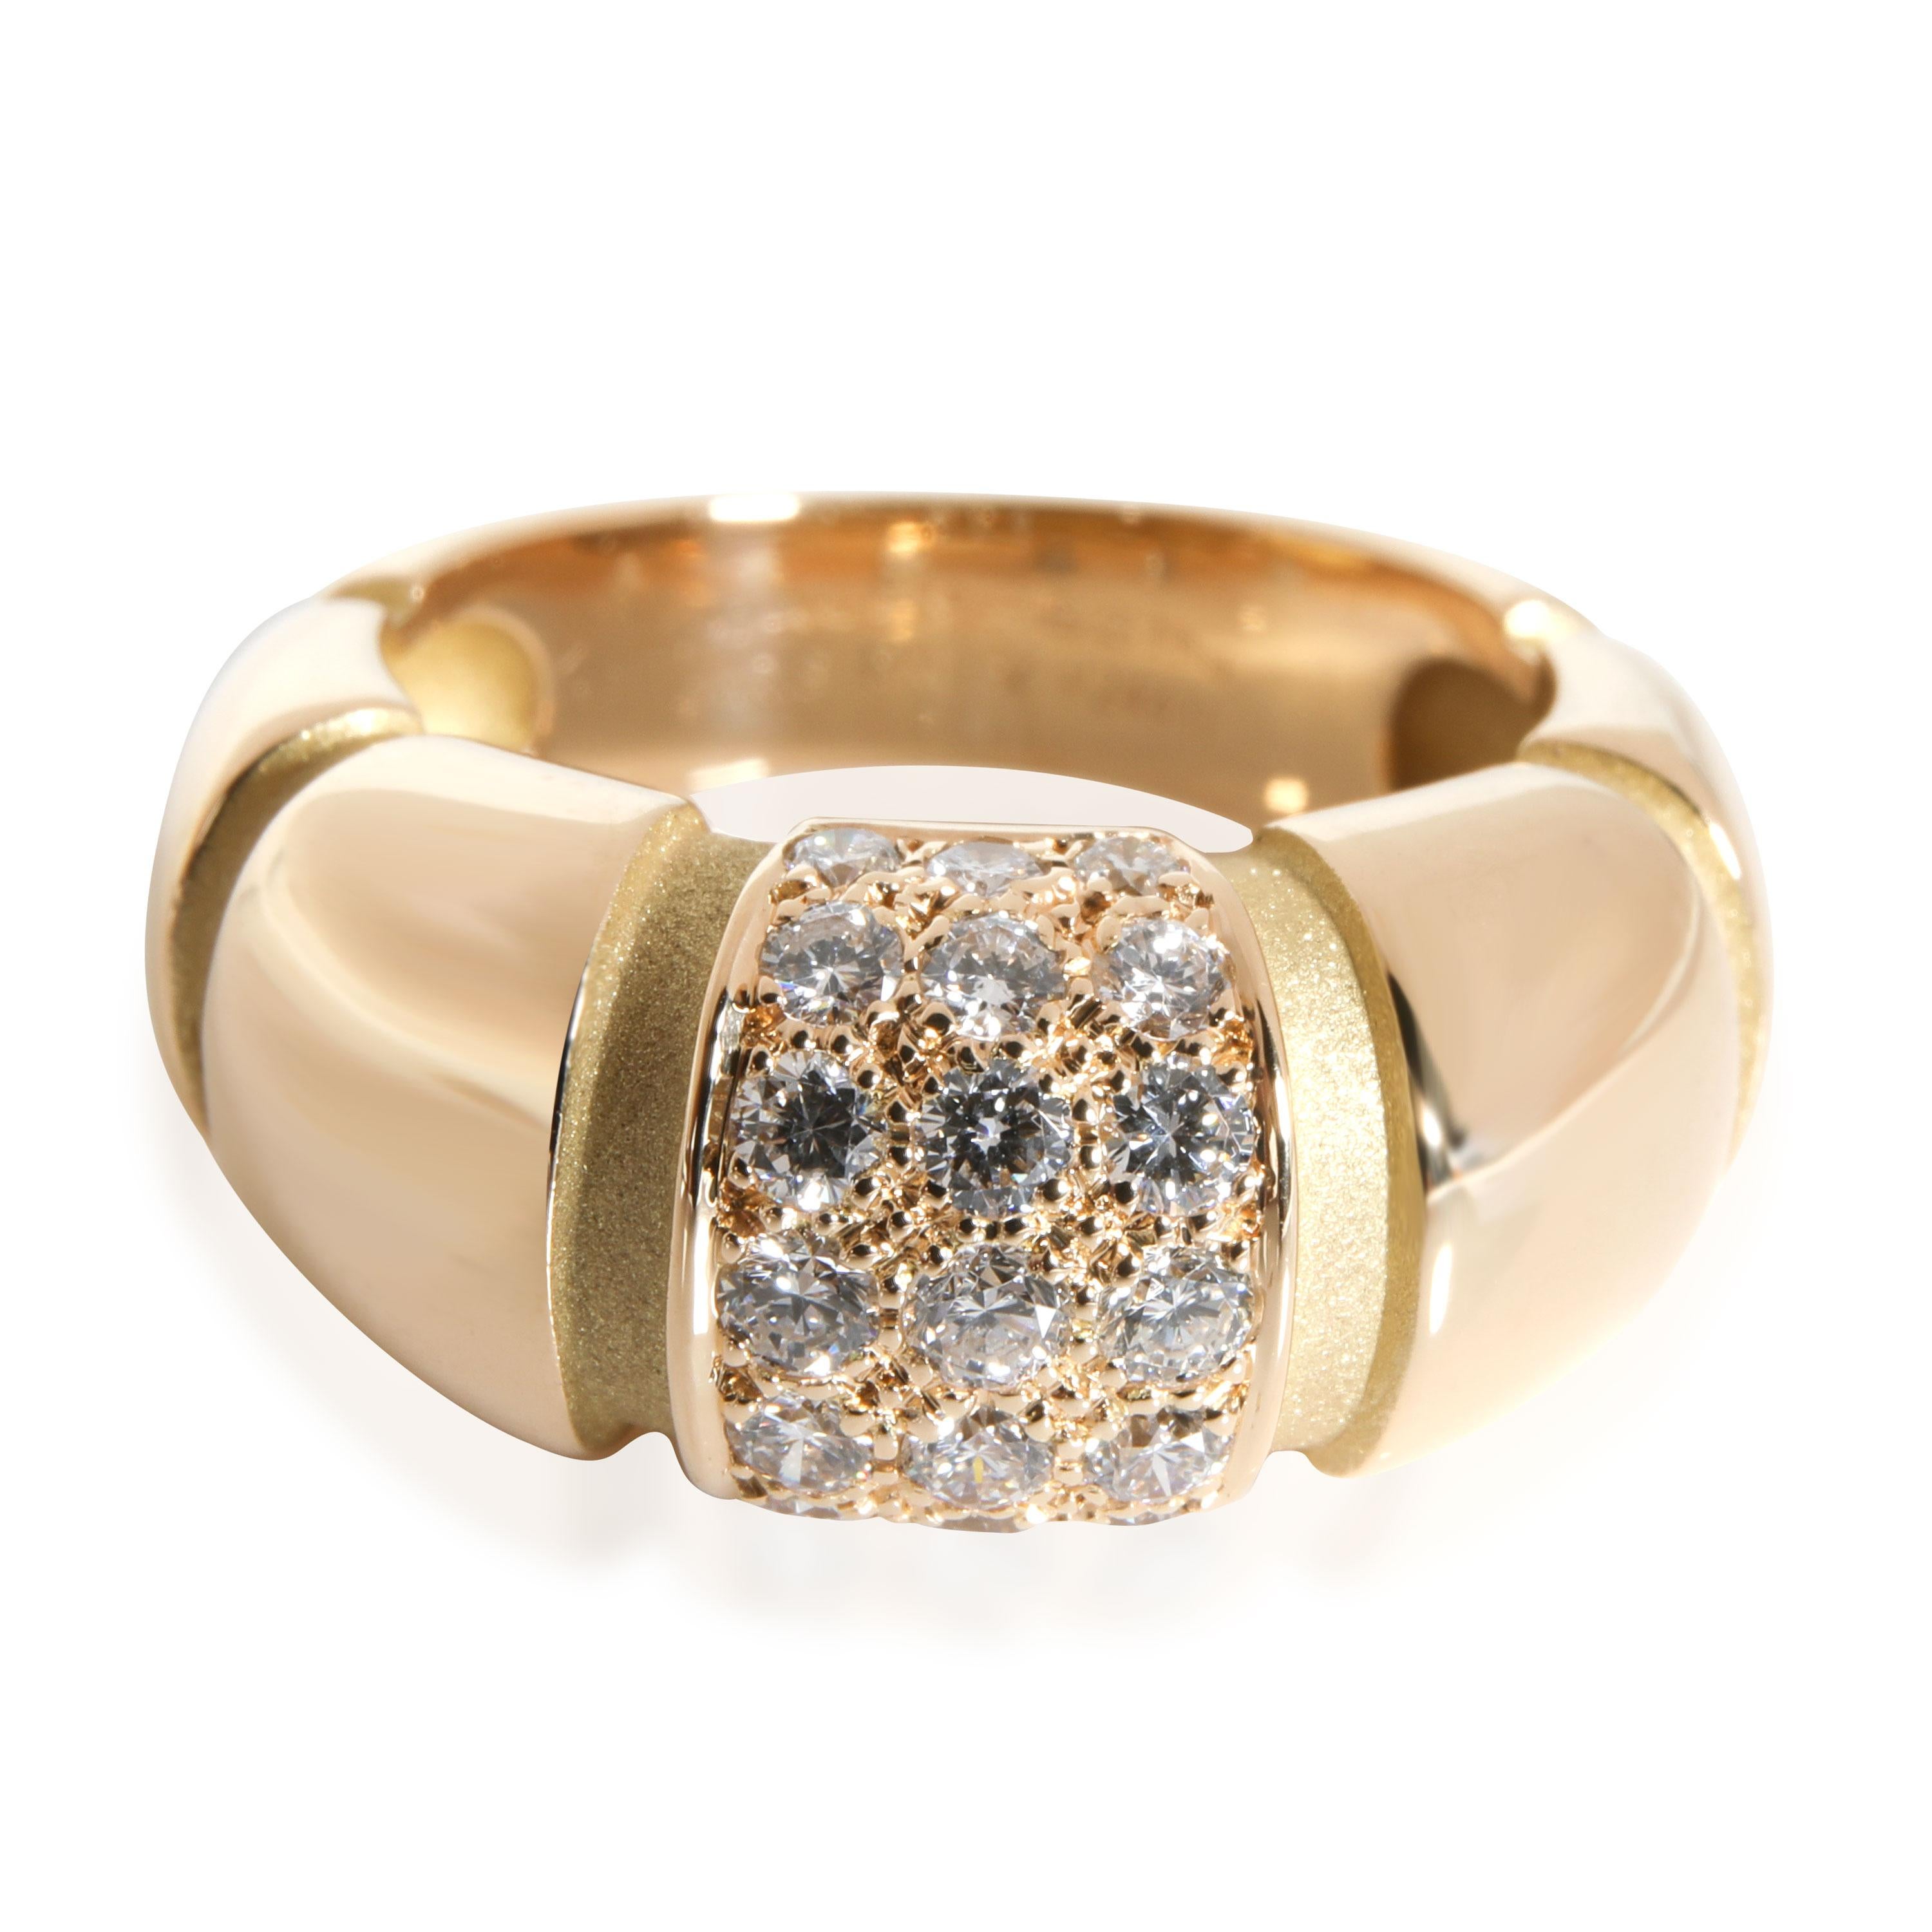 Mauboussin Nadja Diamond Ring in 18k Yellow Gold 0.45 CTW In Excellent Condition For Sale In New York, NY